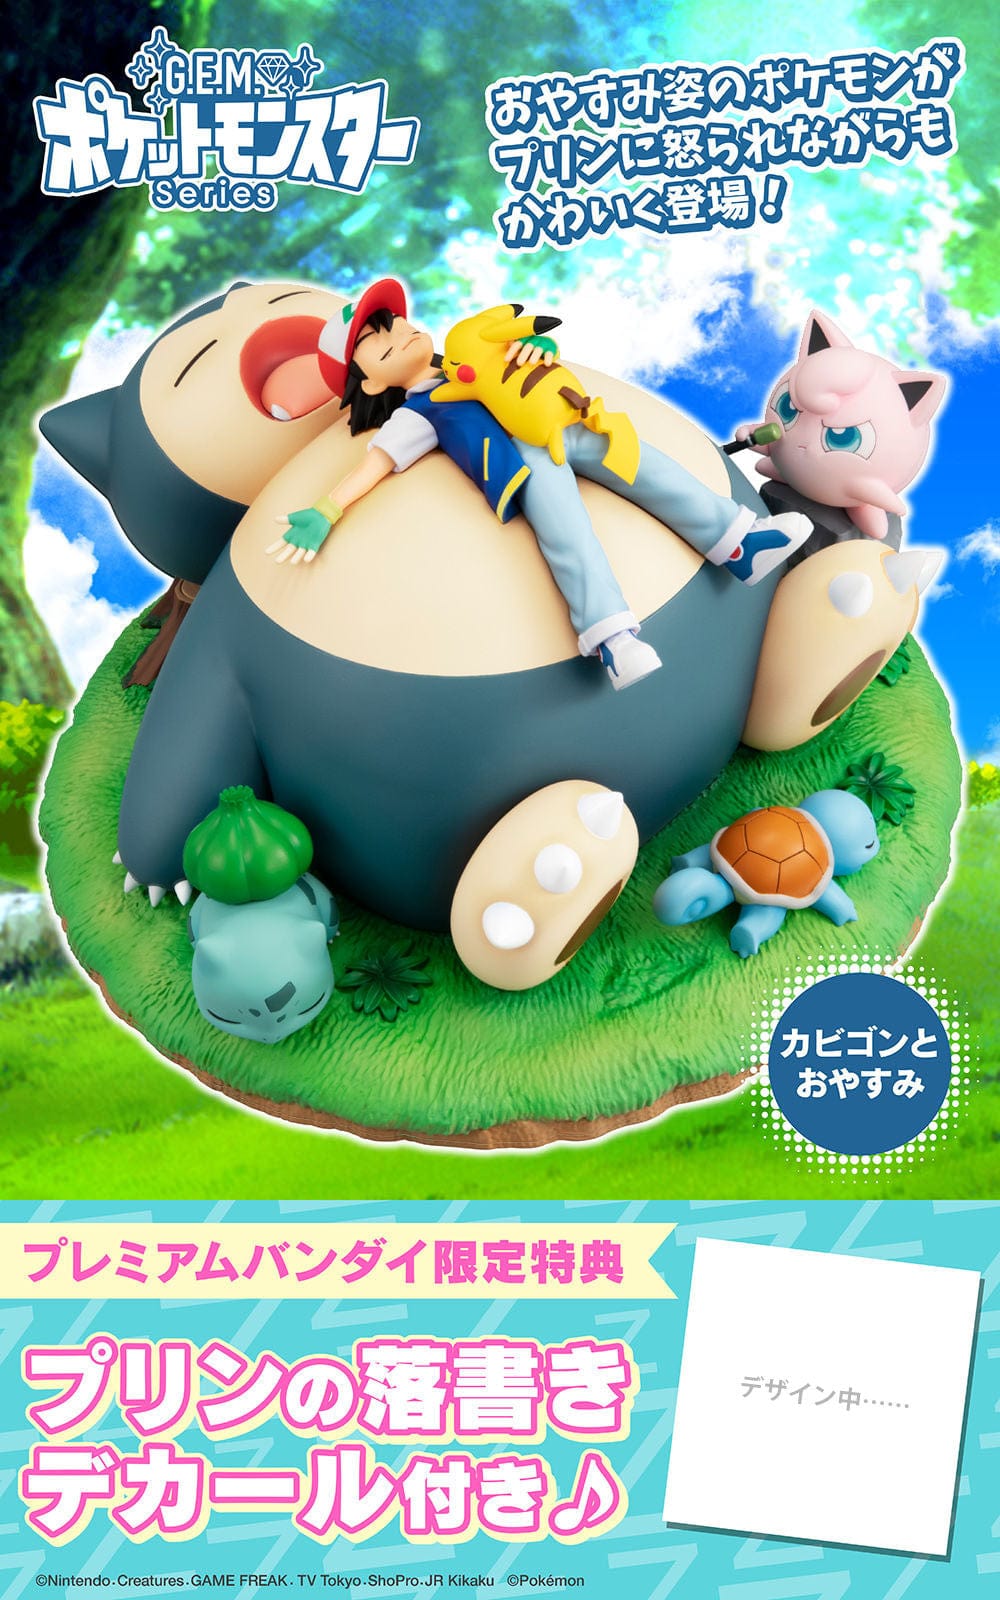 Megahouse Pokemon G.E.M. Series Bedtime with Snorlax ( with gift )